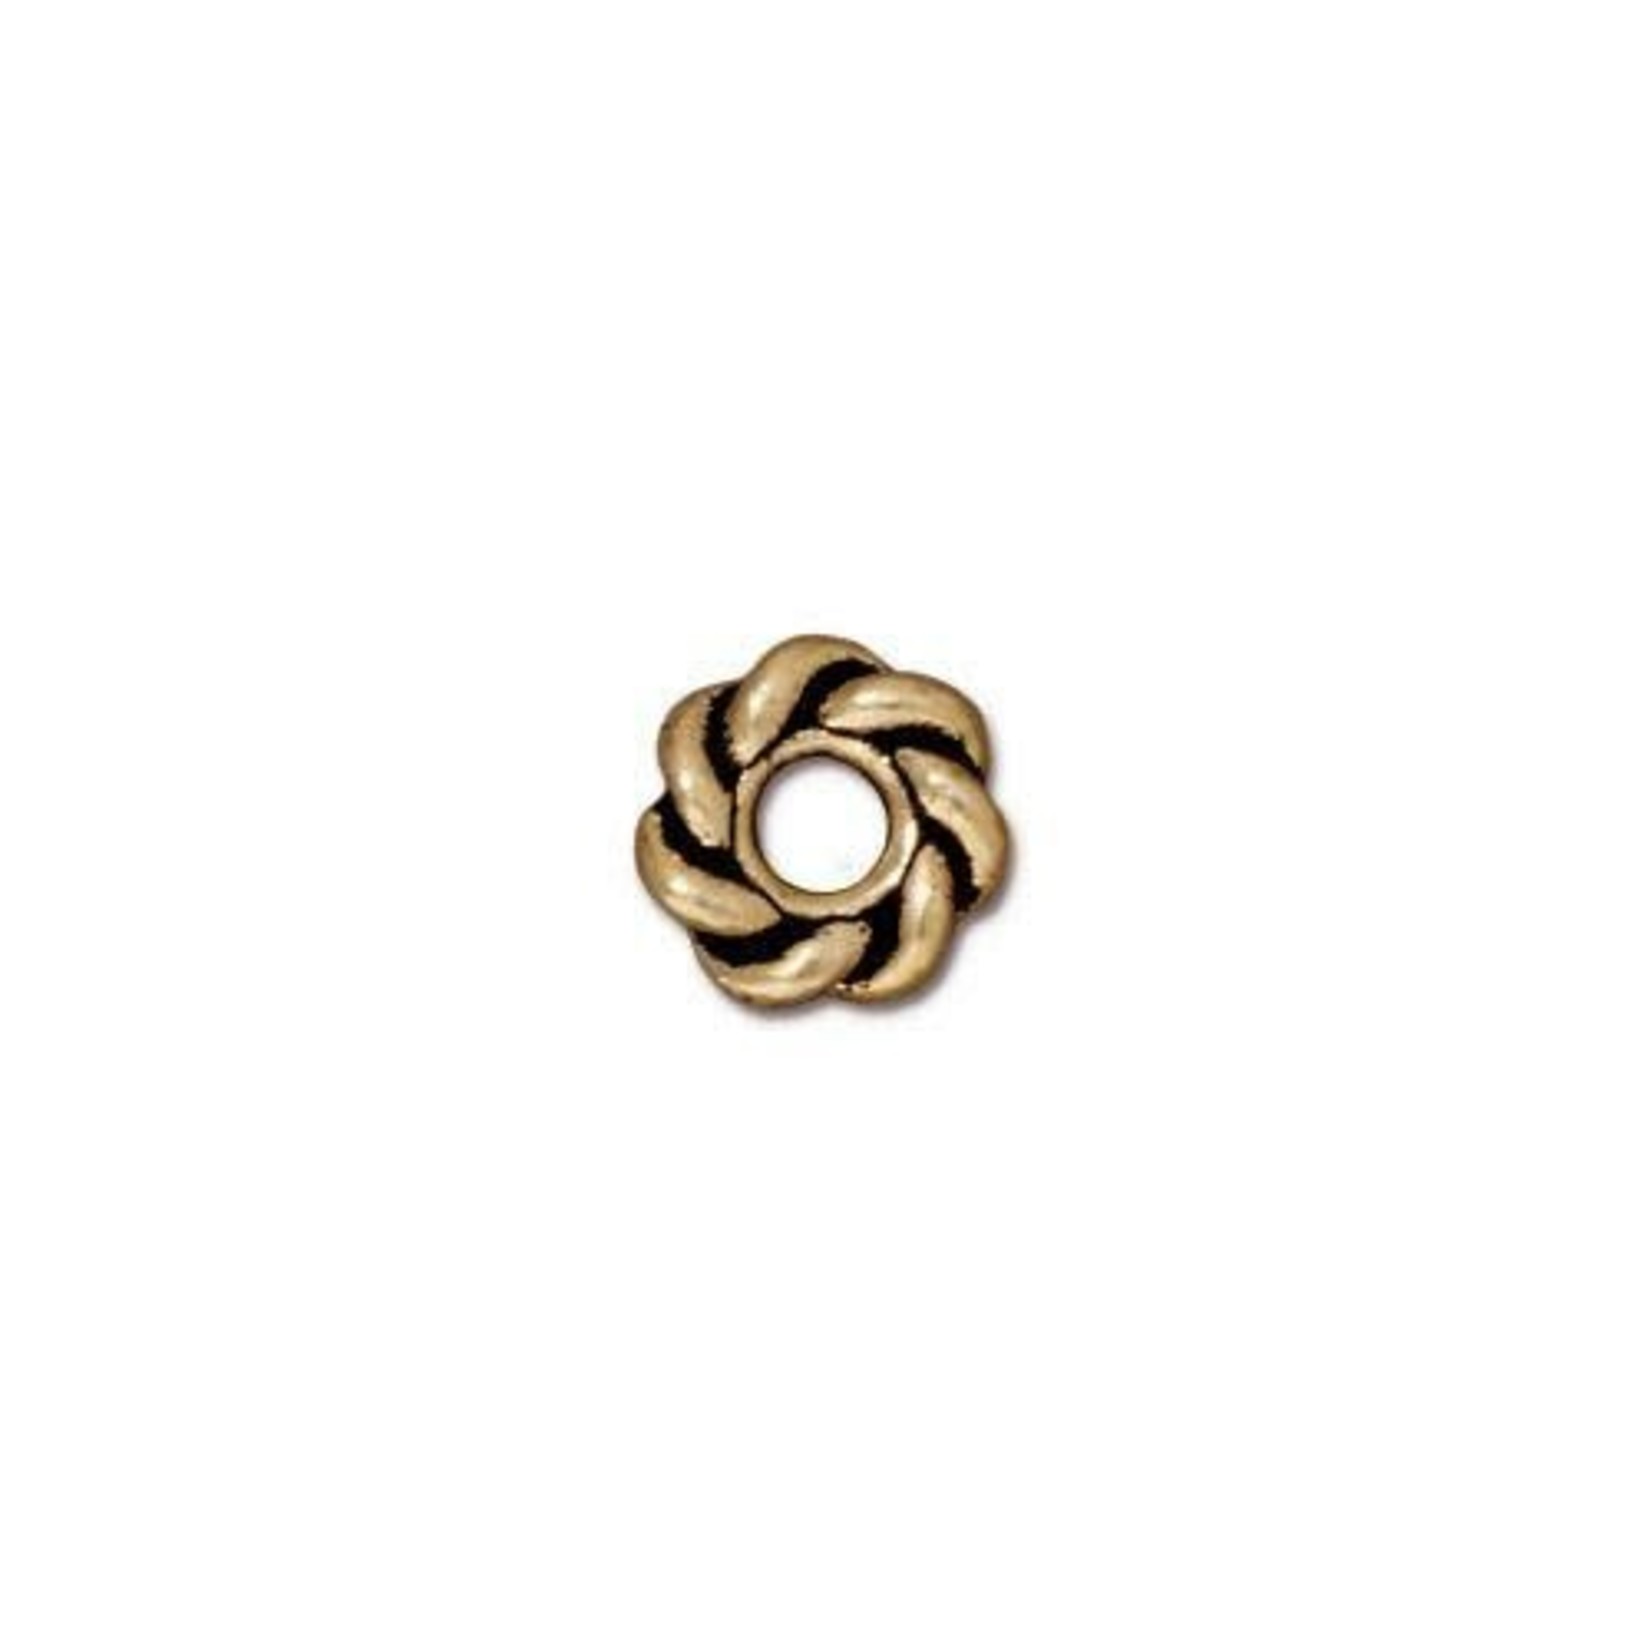 TierraCast Tierracast Antique Gold Plated 8mm Wide Twisted Spacer